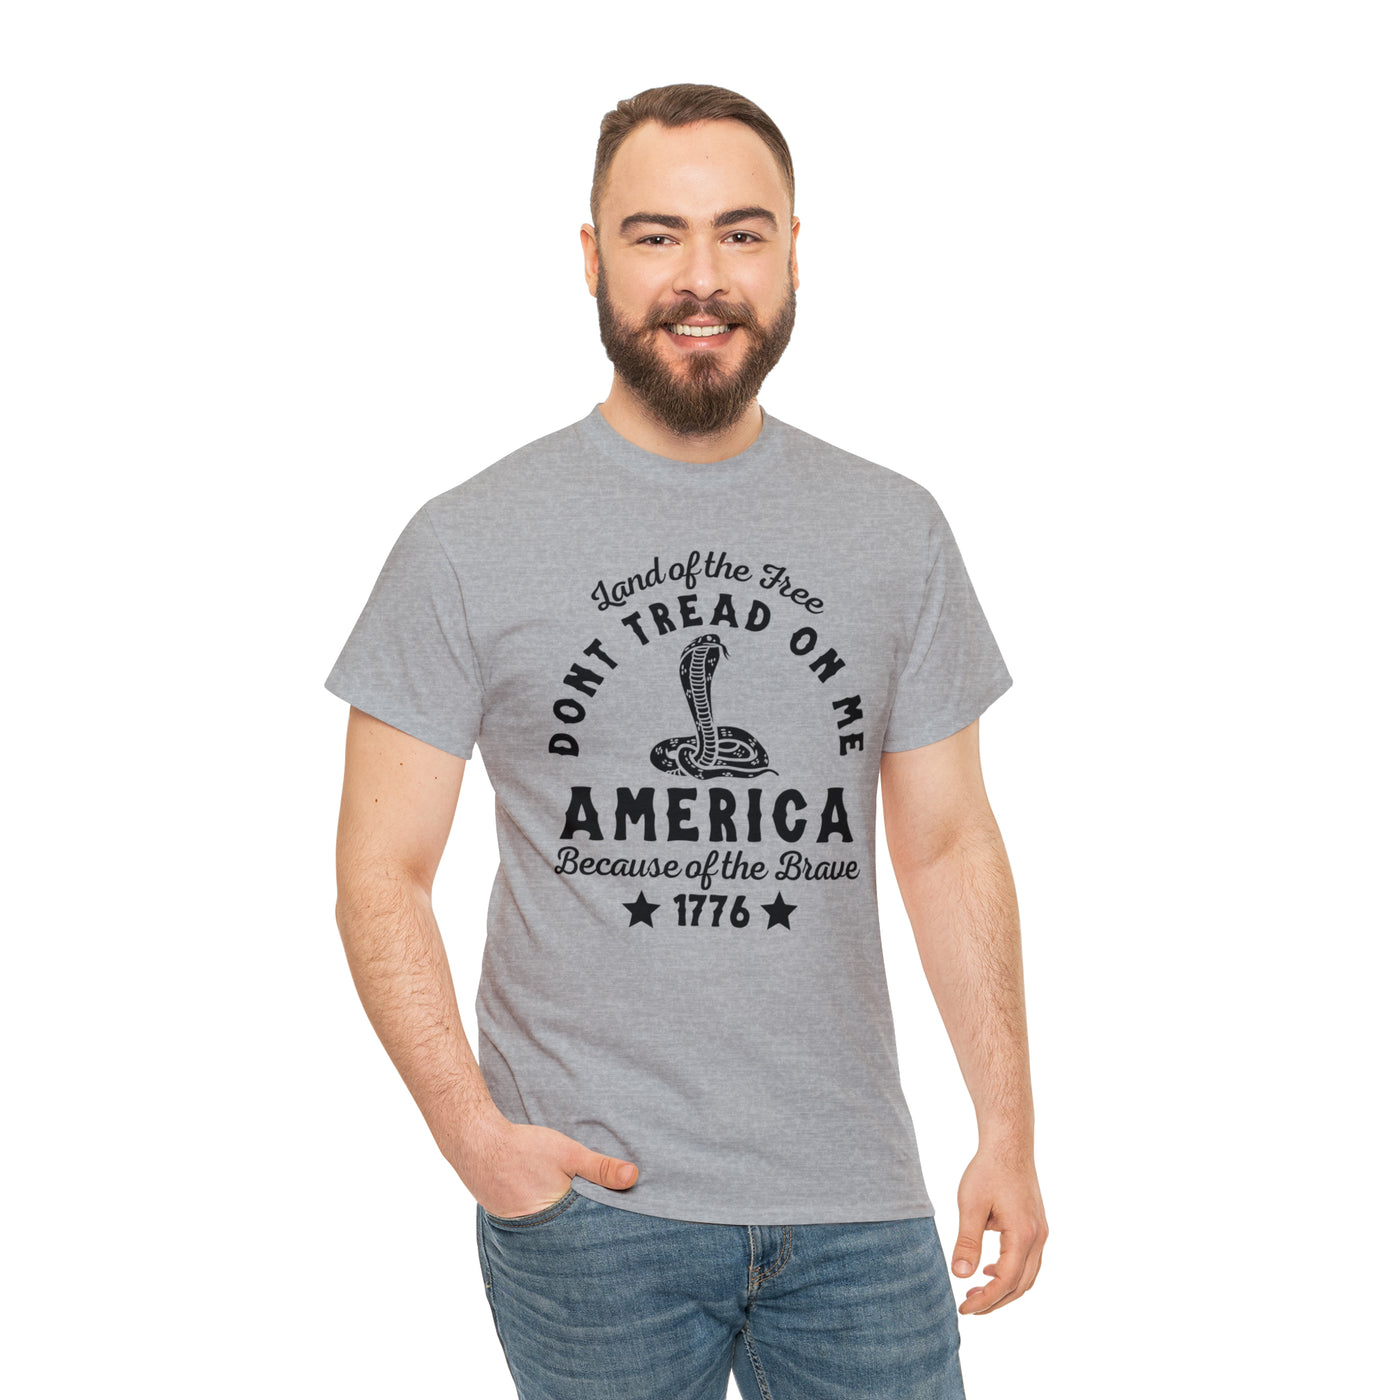 Land Of The Free Don't Tread On Me Patriotic T-Shirt